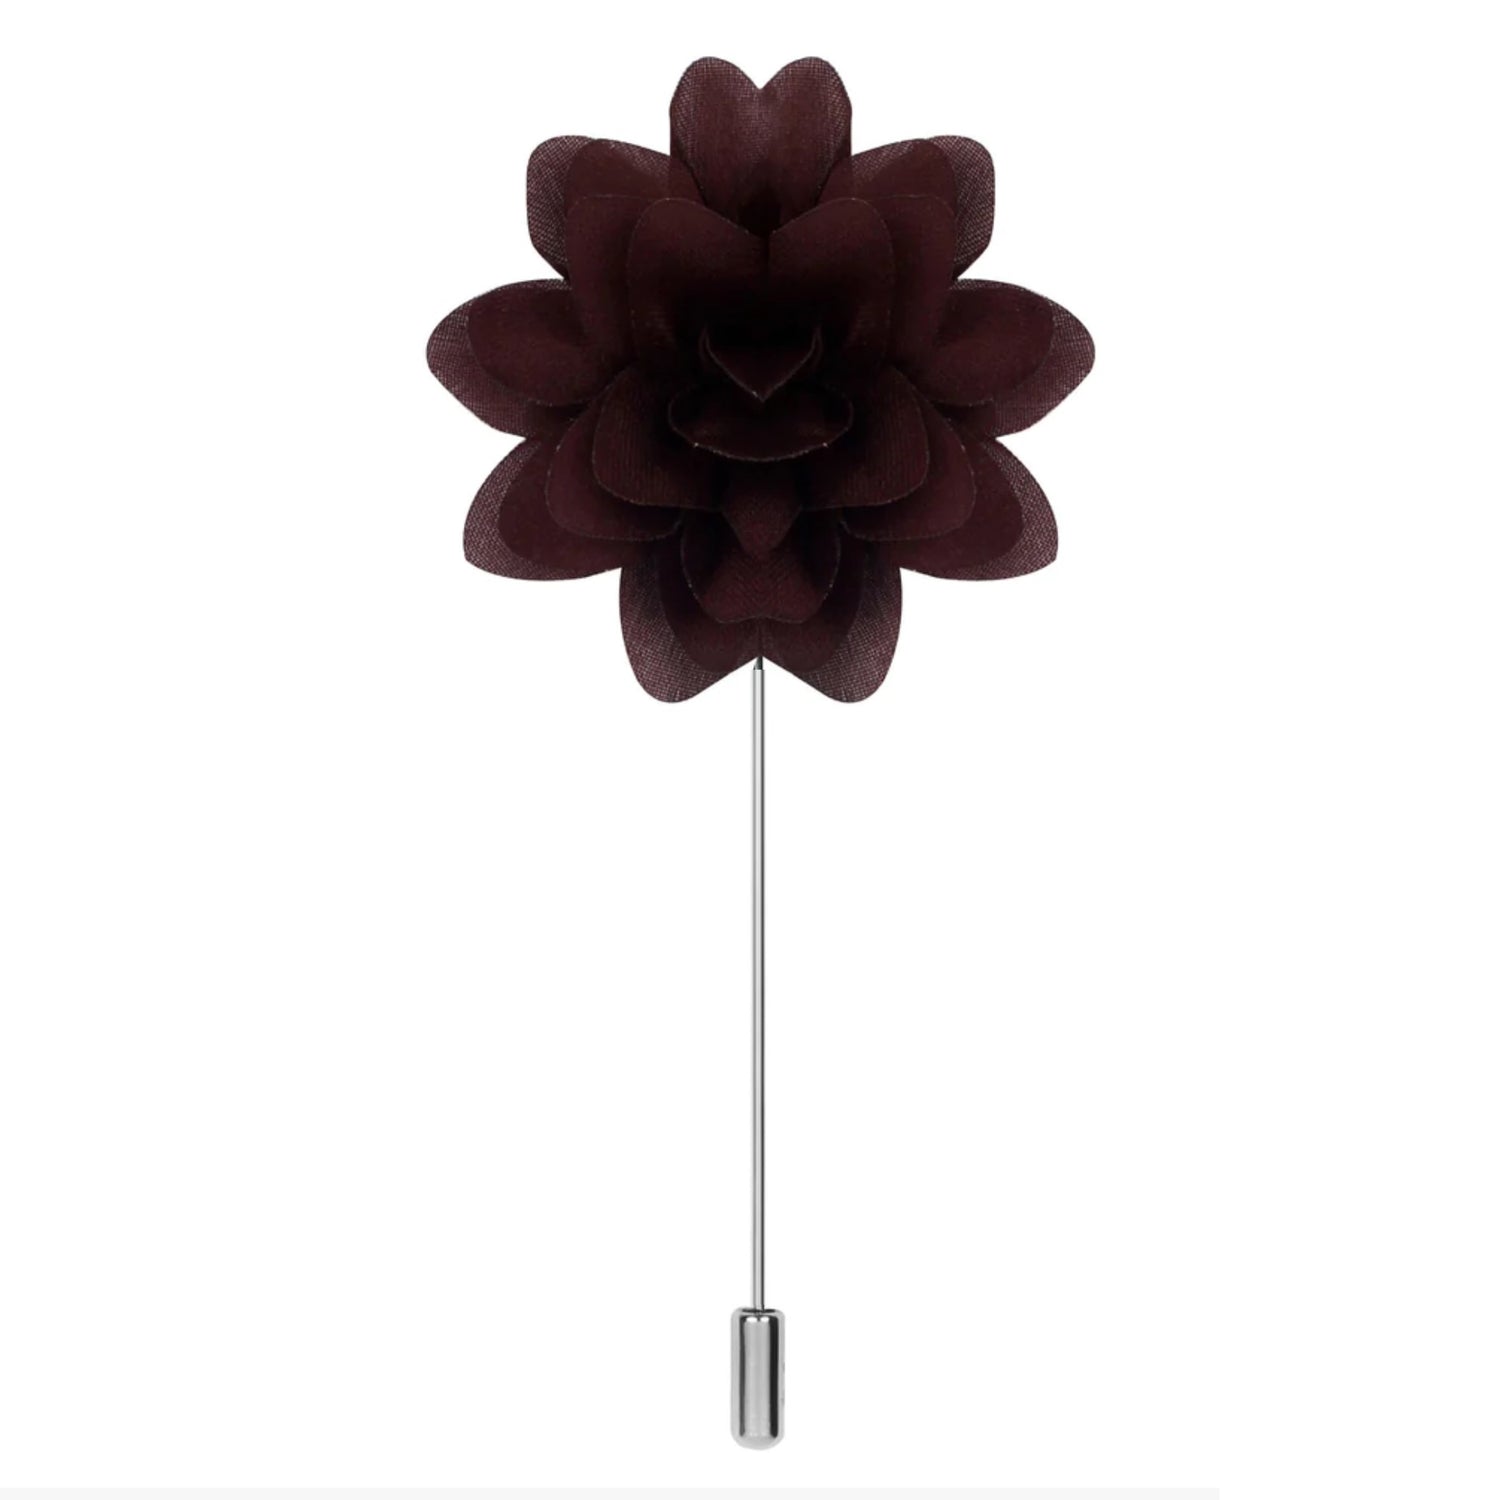 Main: A Brown Color Star Flower Shaped Lapel Pin||Brown